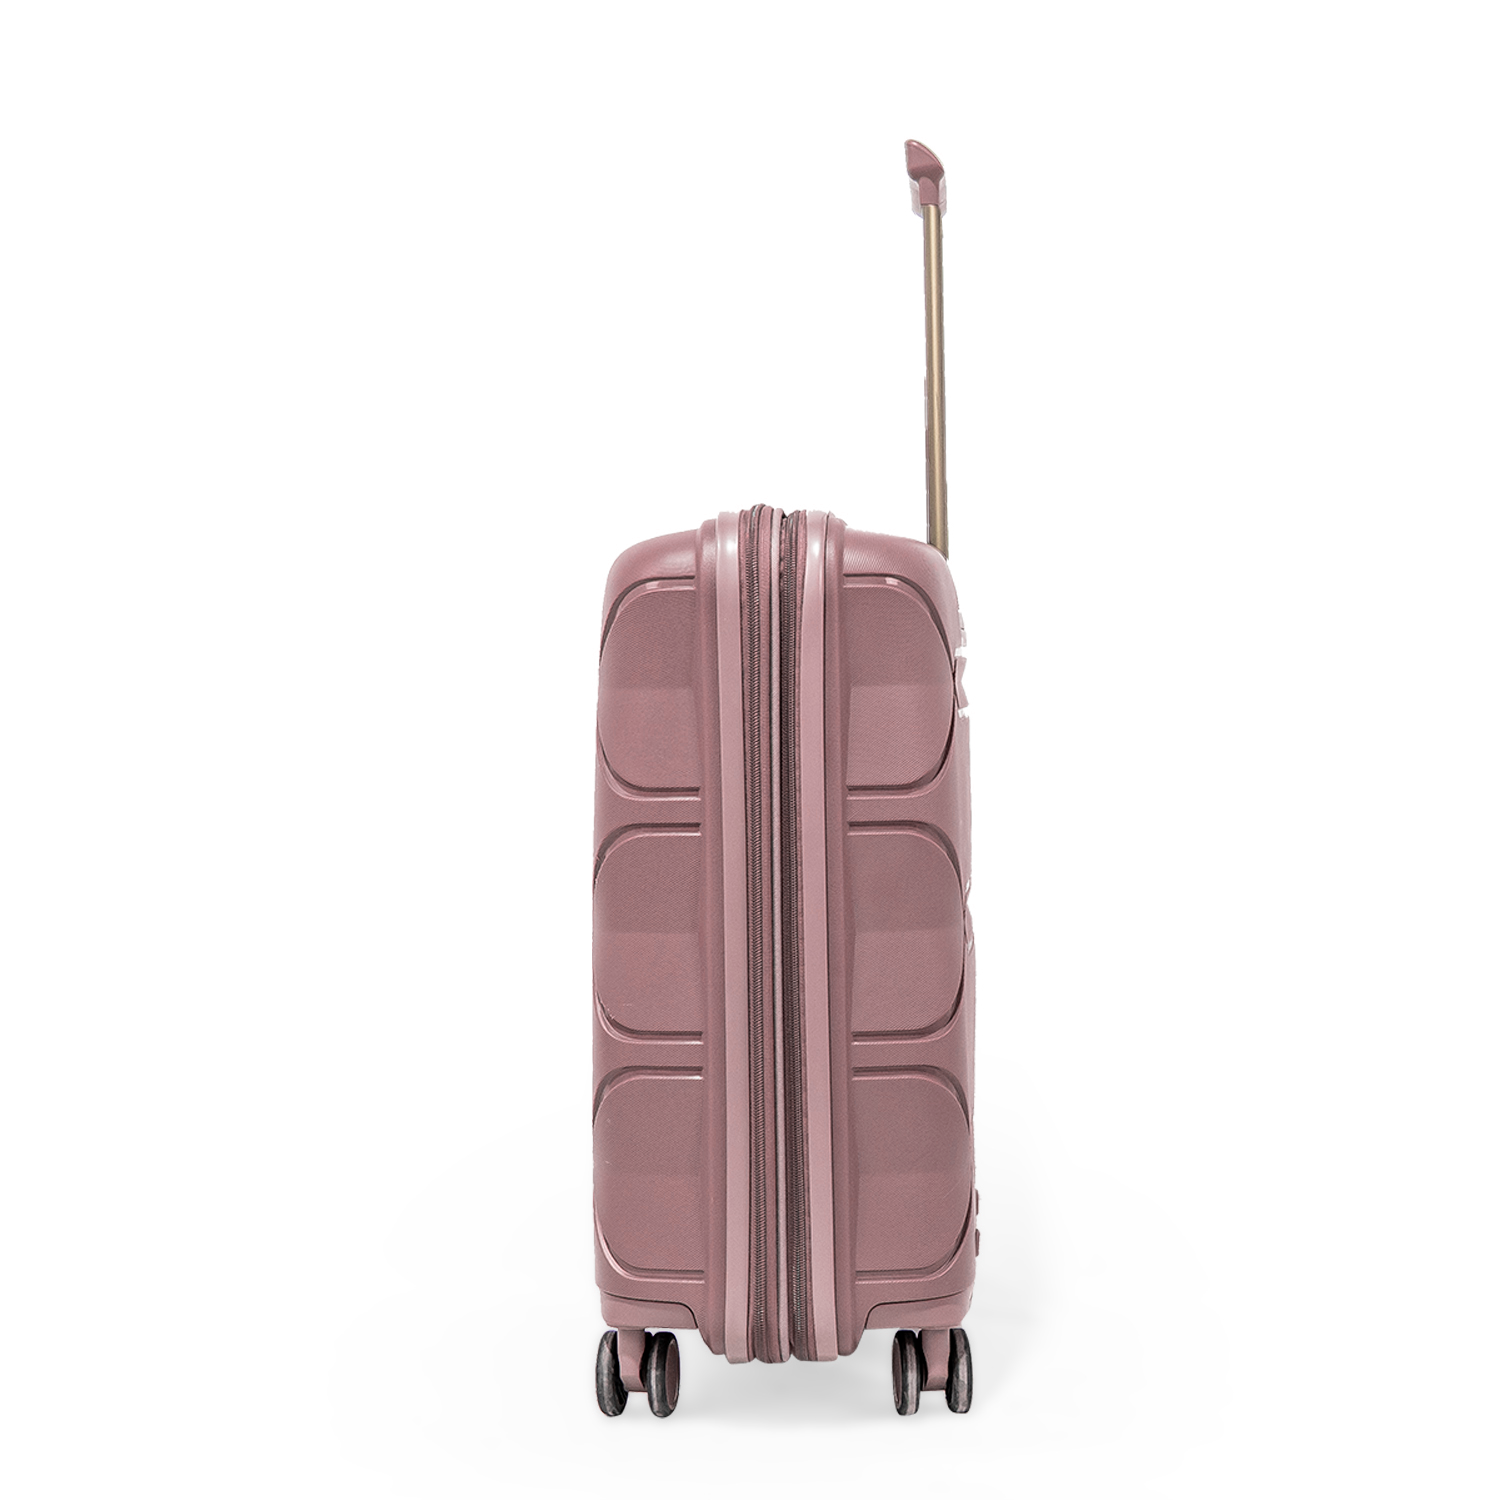 Pierre Cardin Trolley Strong Flexible Suitcases Set of 3 Rose Gold